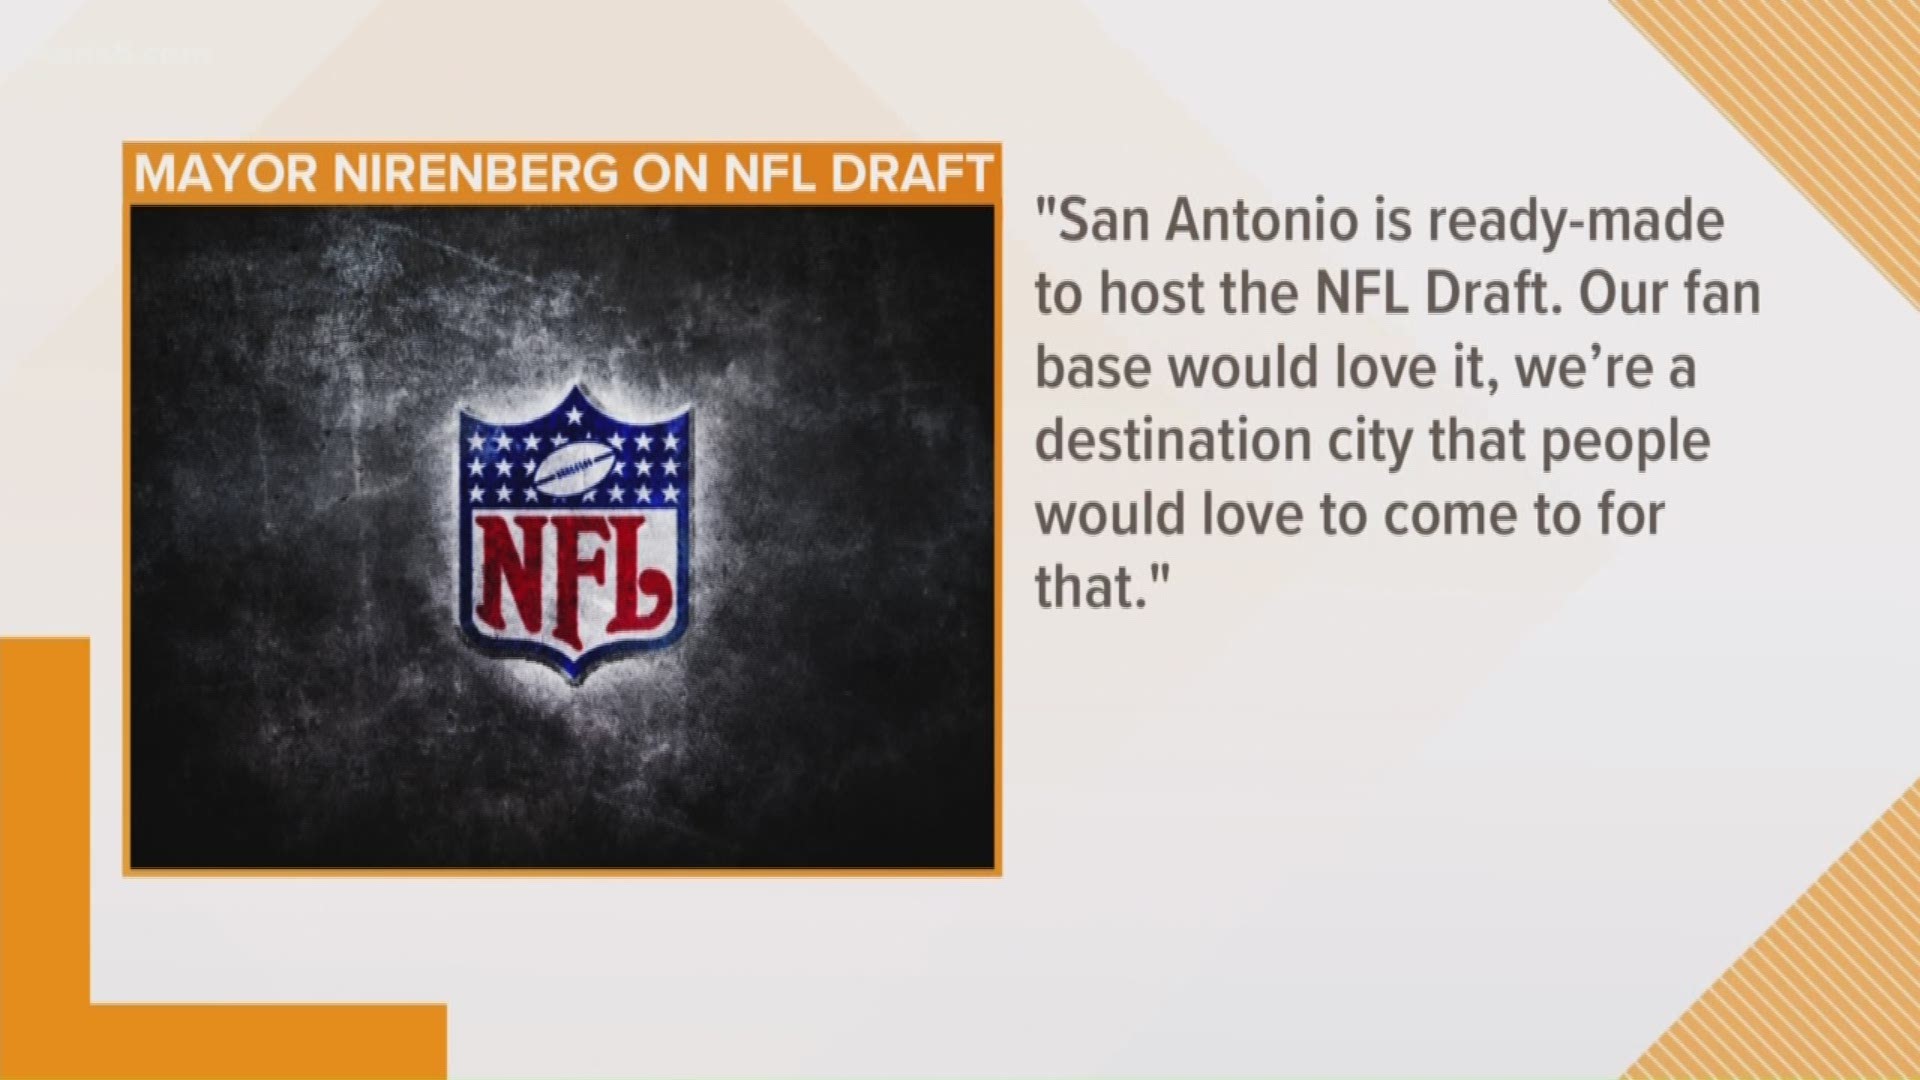 "San Antonio is ready-made to host the NFL Draft." What do you think?